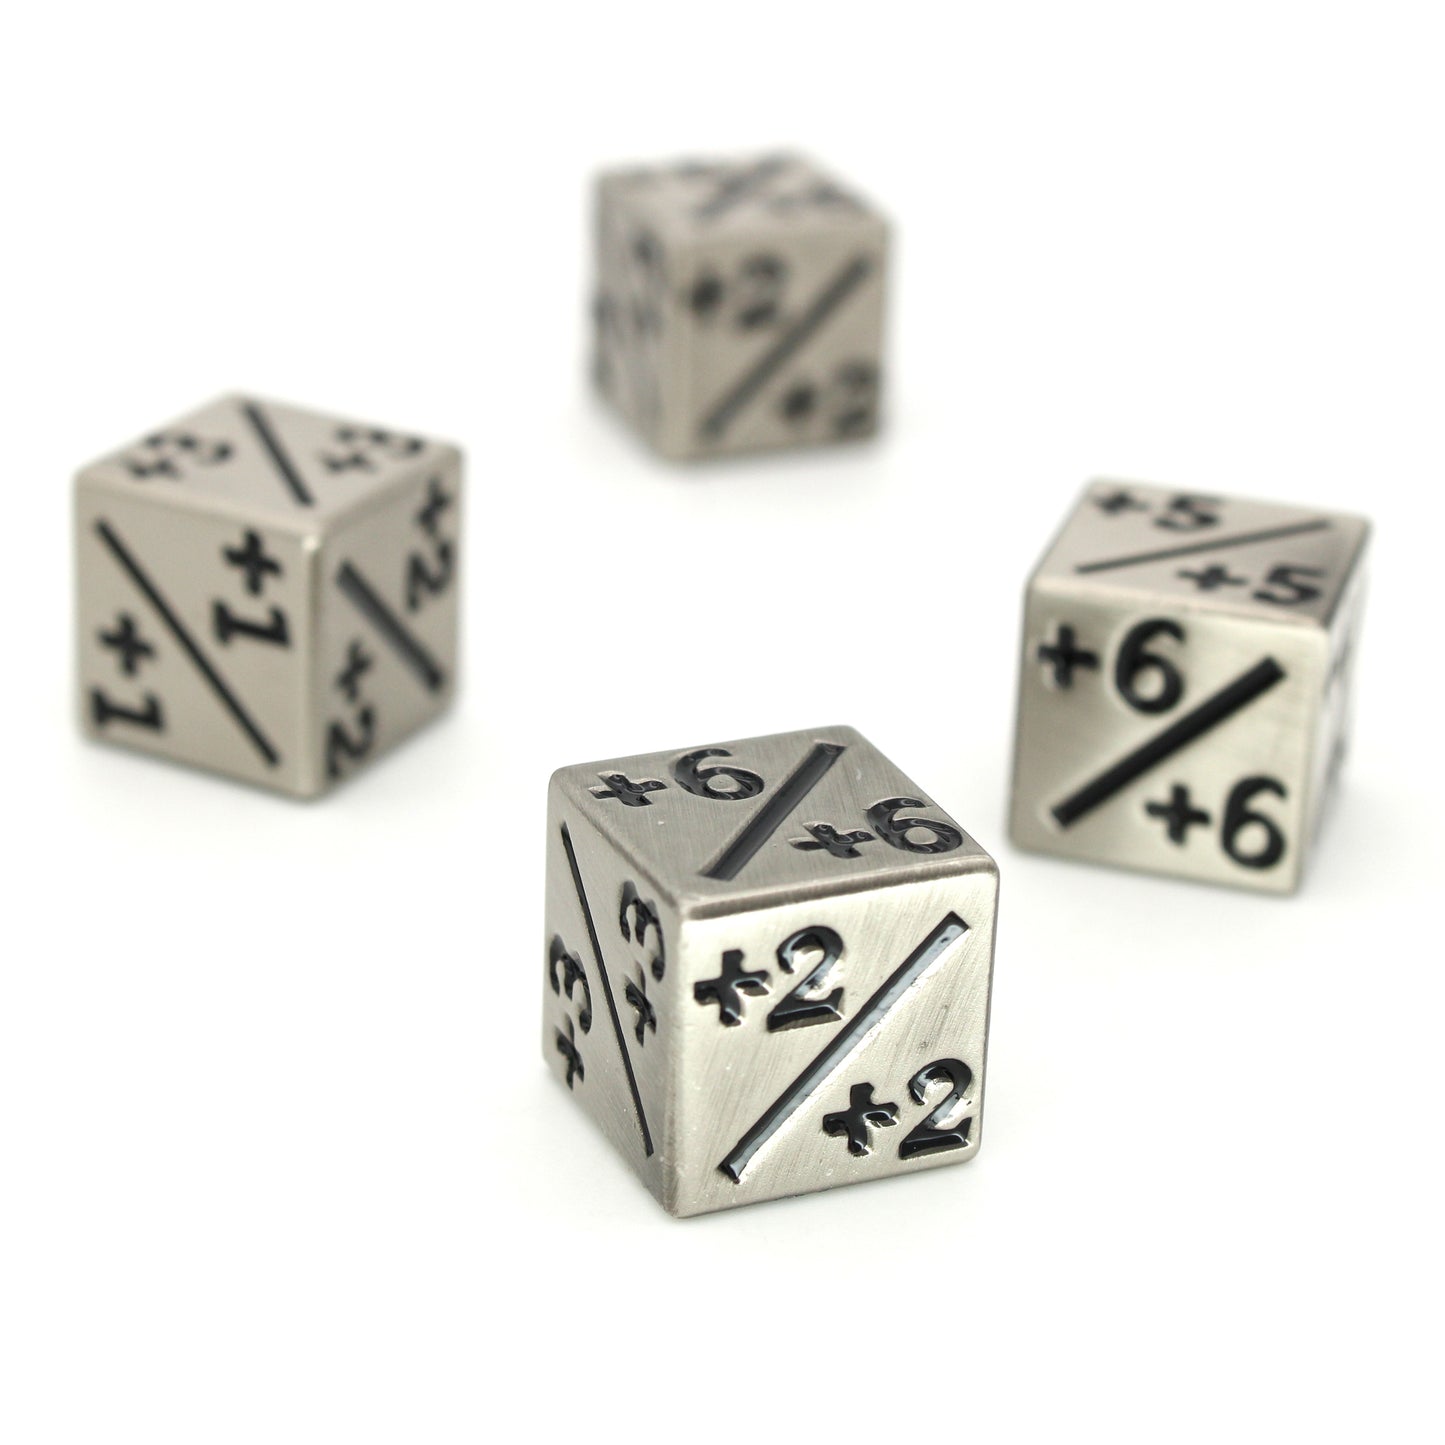 Magic Counters are individual shiny, silver six-sided +1/+1 through +6/+6 dice for use with Magic the Gathering.